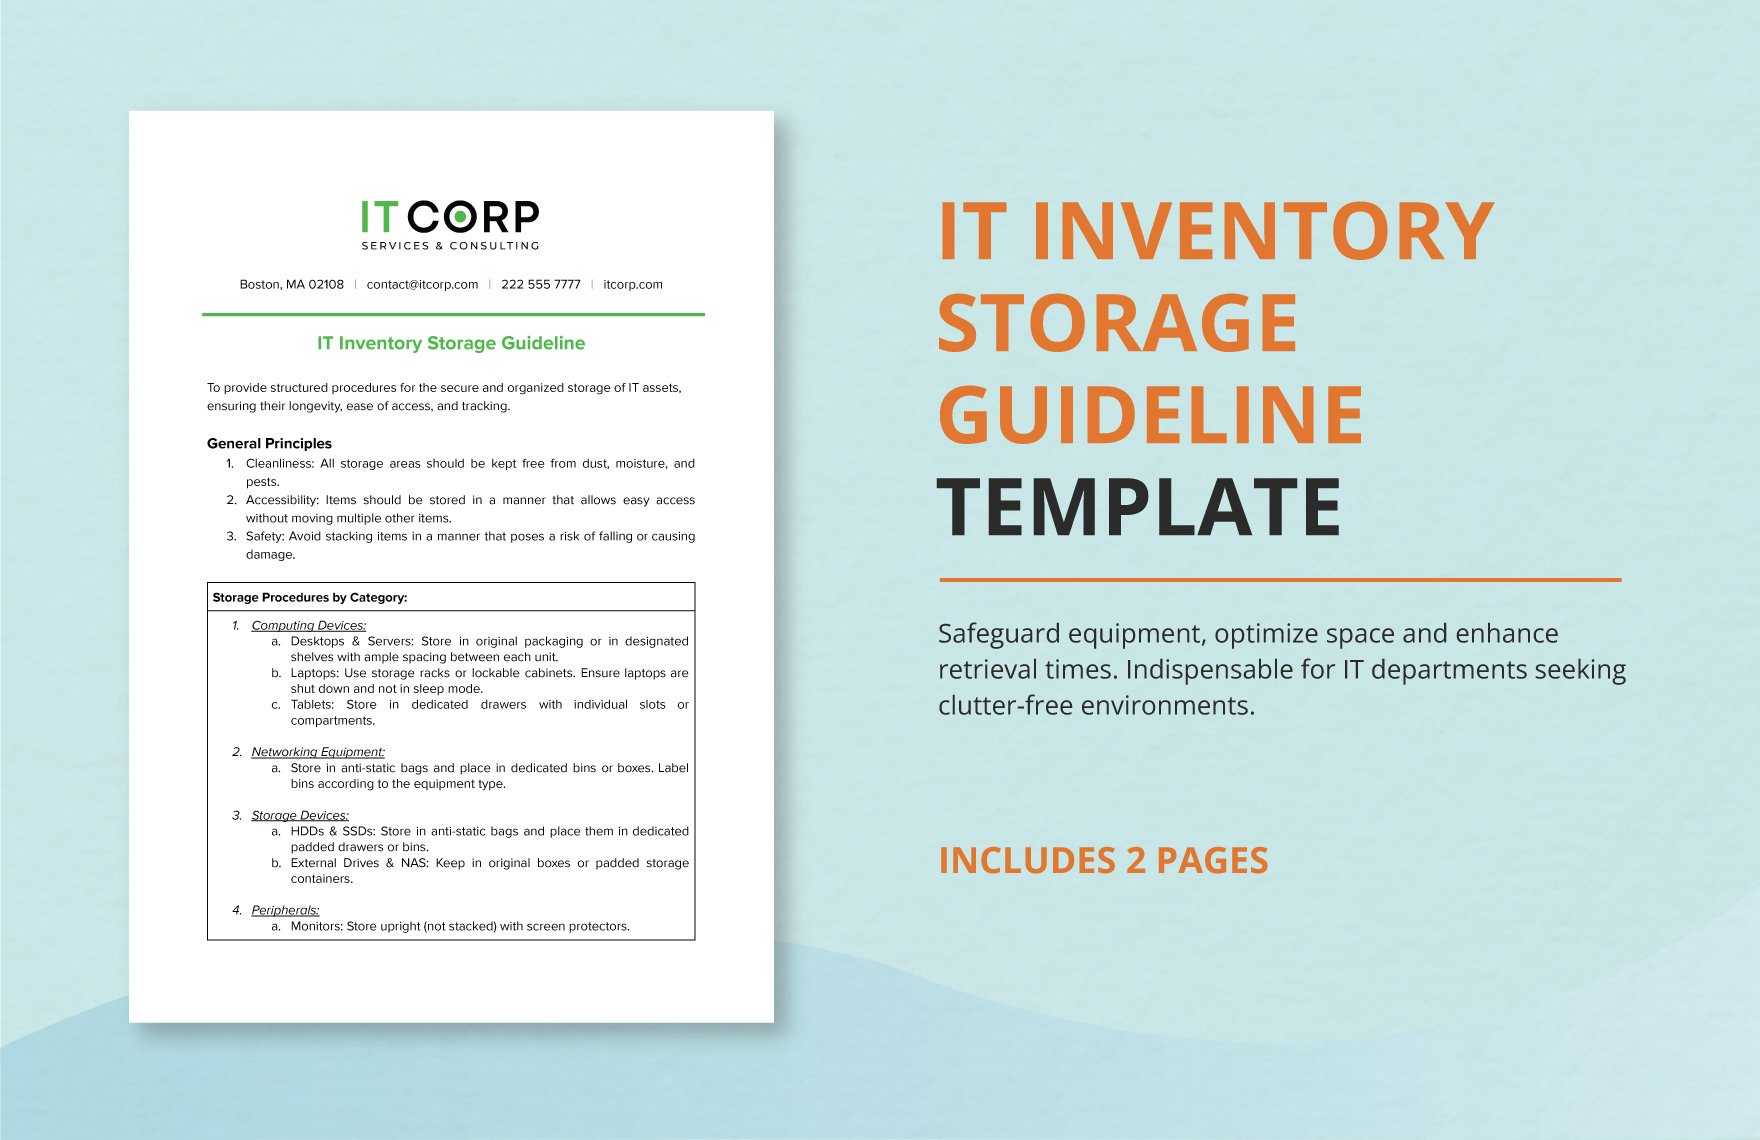 IT Inventory Storage Guideline Template